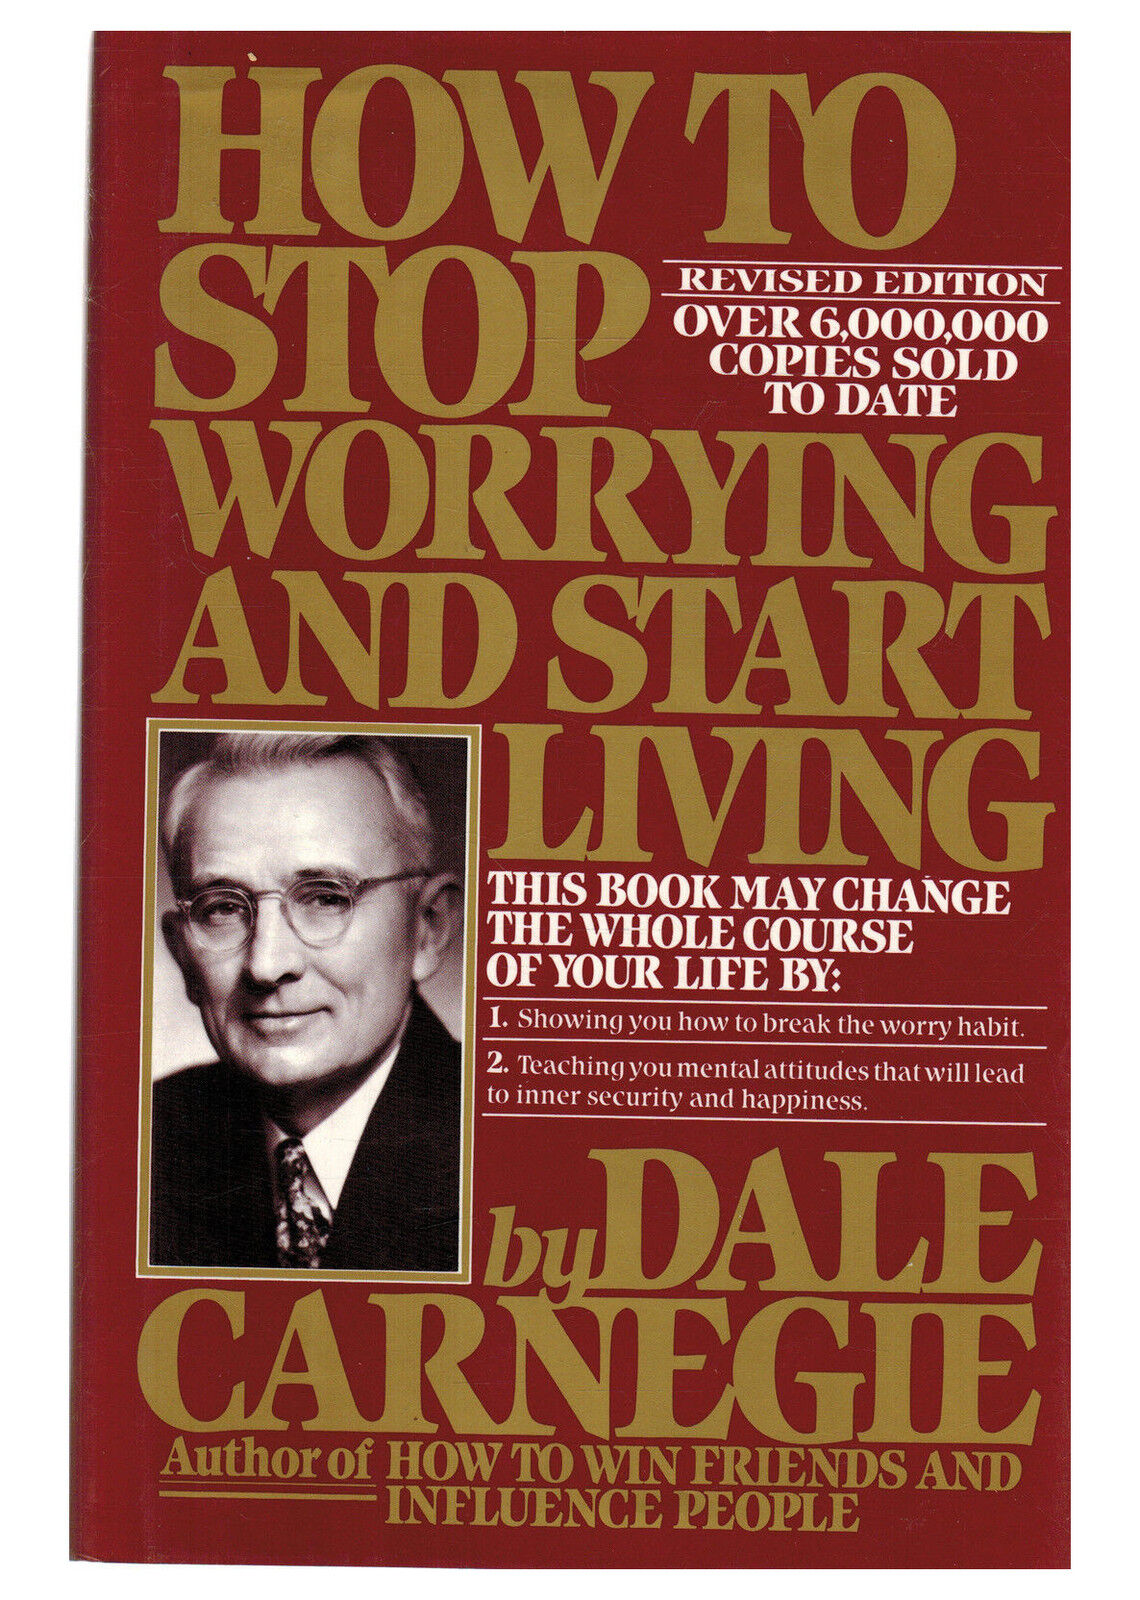 Image result for Dale Carnegie "How to stop worrying and start living"